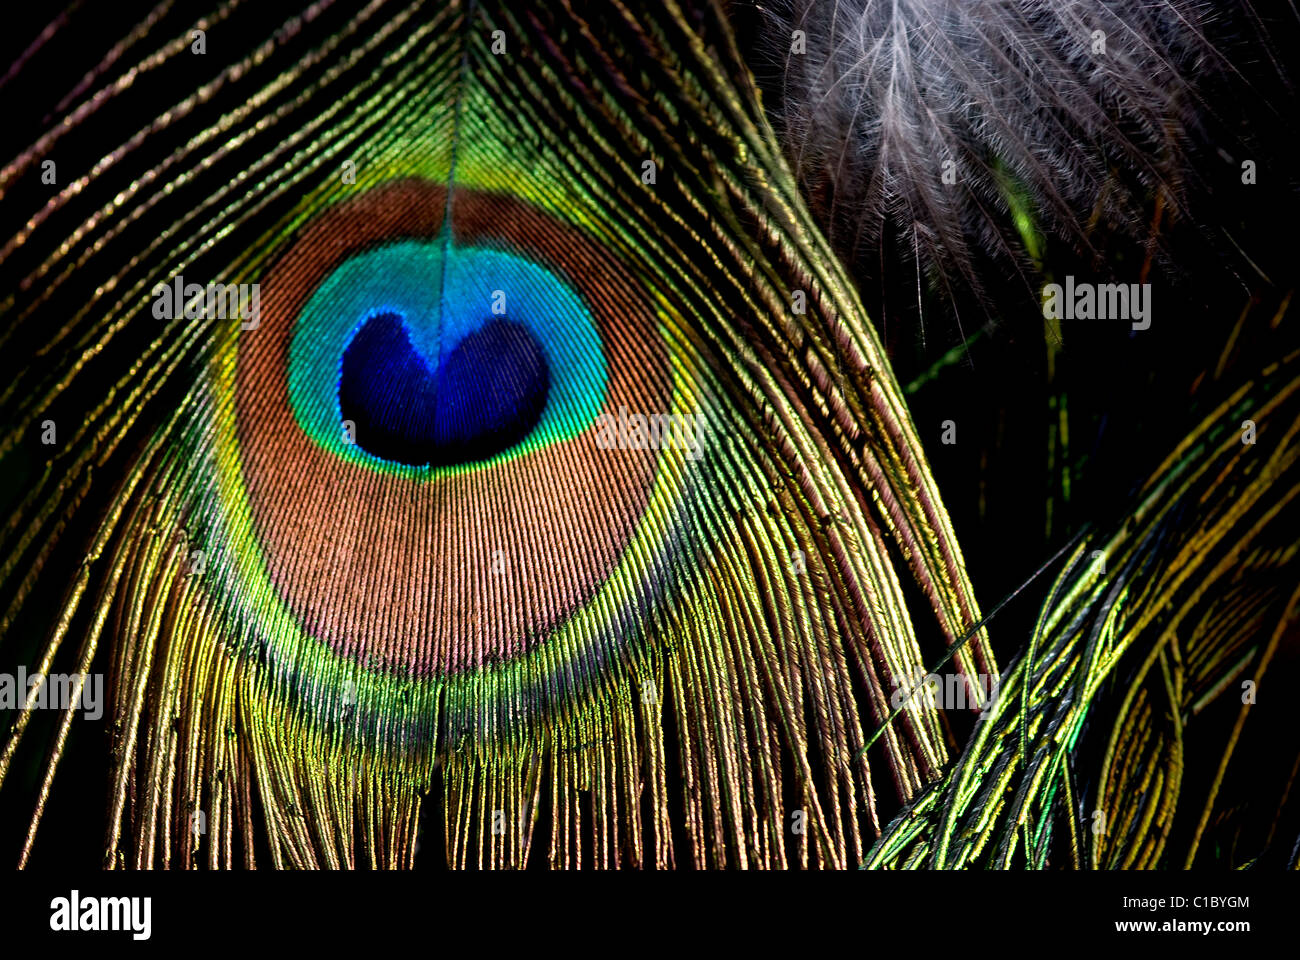 Close-up of a peacocks tail feather, showing the blue heart-shaped center. Stock Photo